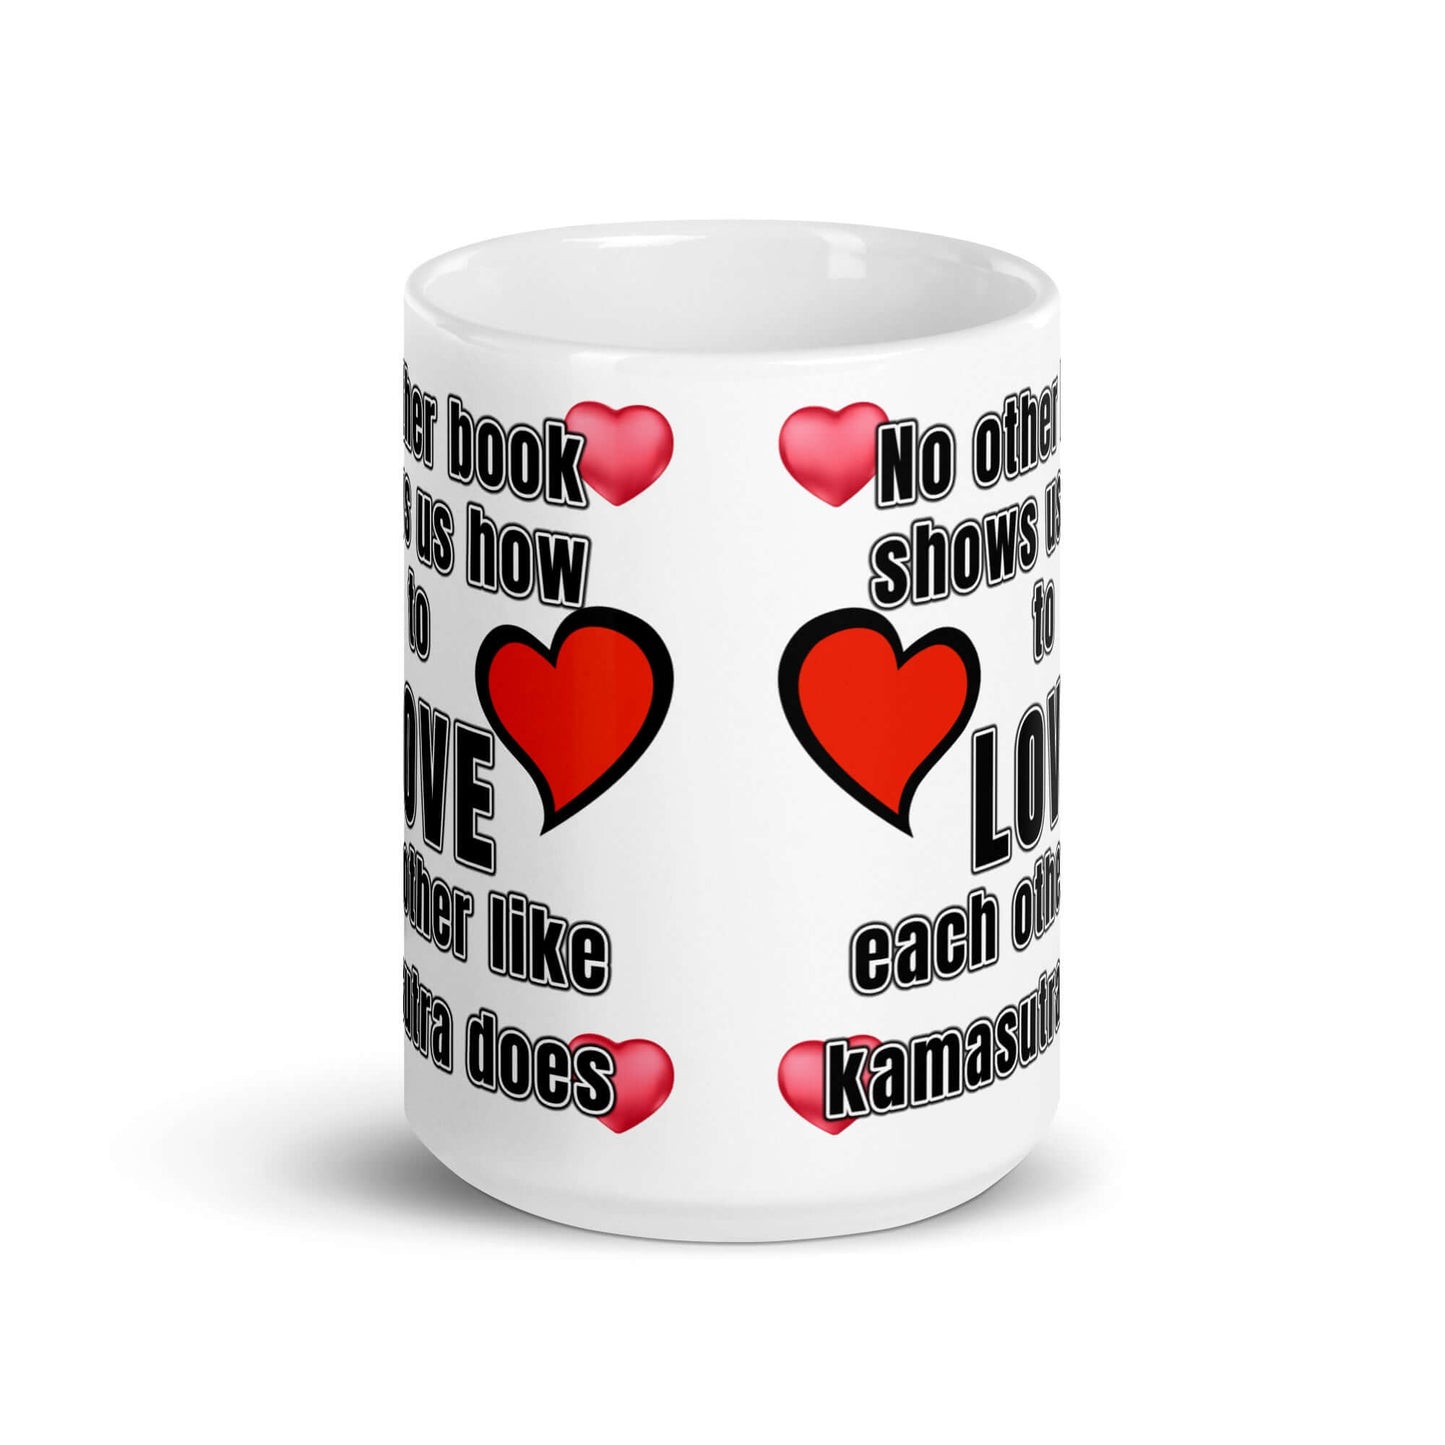 No other book shows us how to love each other like the Kamasutra does - White glossy mug - Horrible Designs